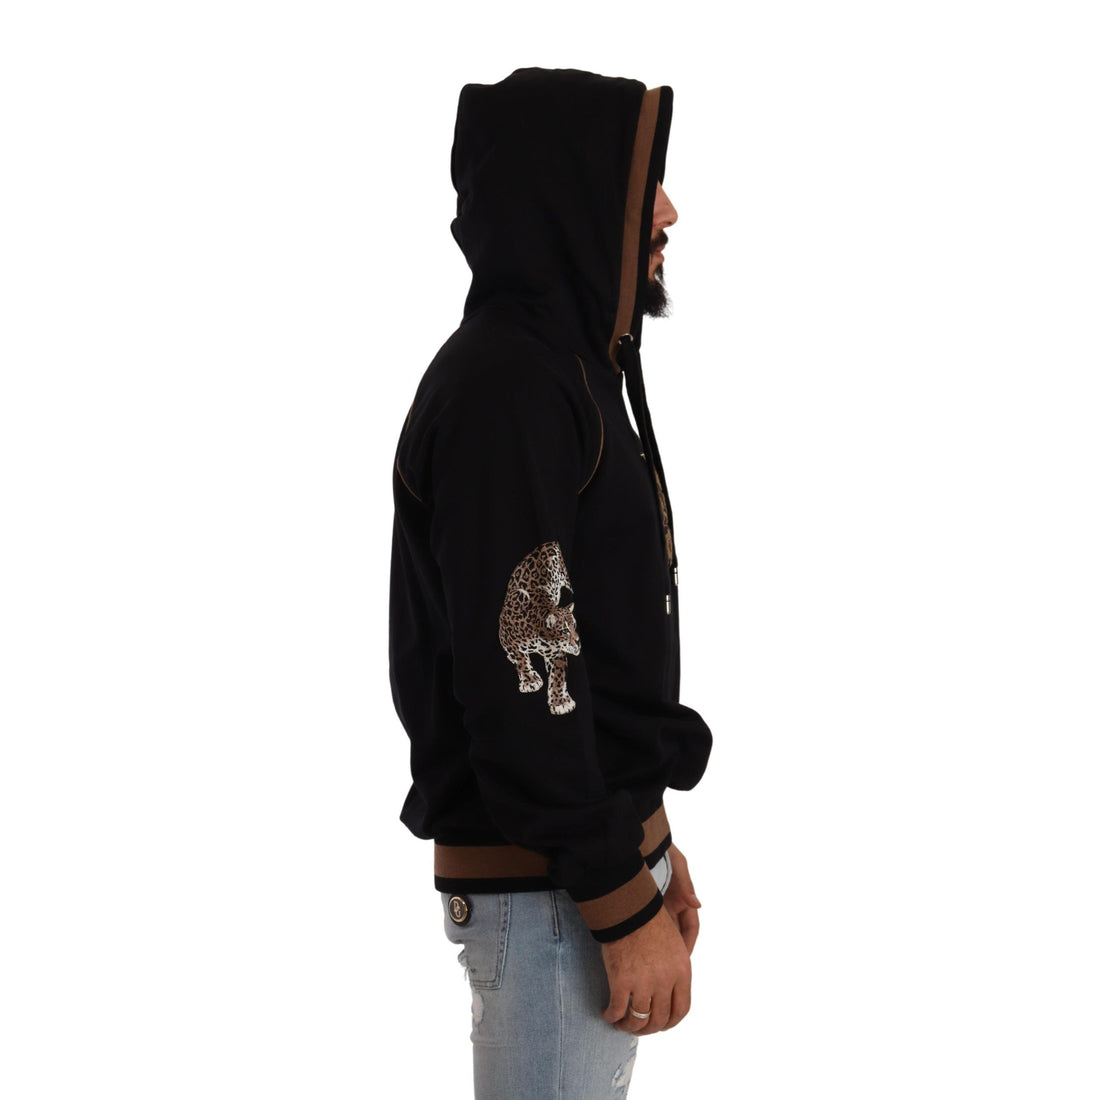 Dolce & Gabbana Black Brown Leopard Cotton Hooded Pullover Sweater